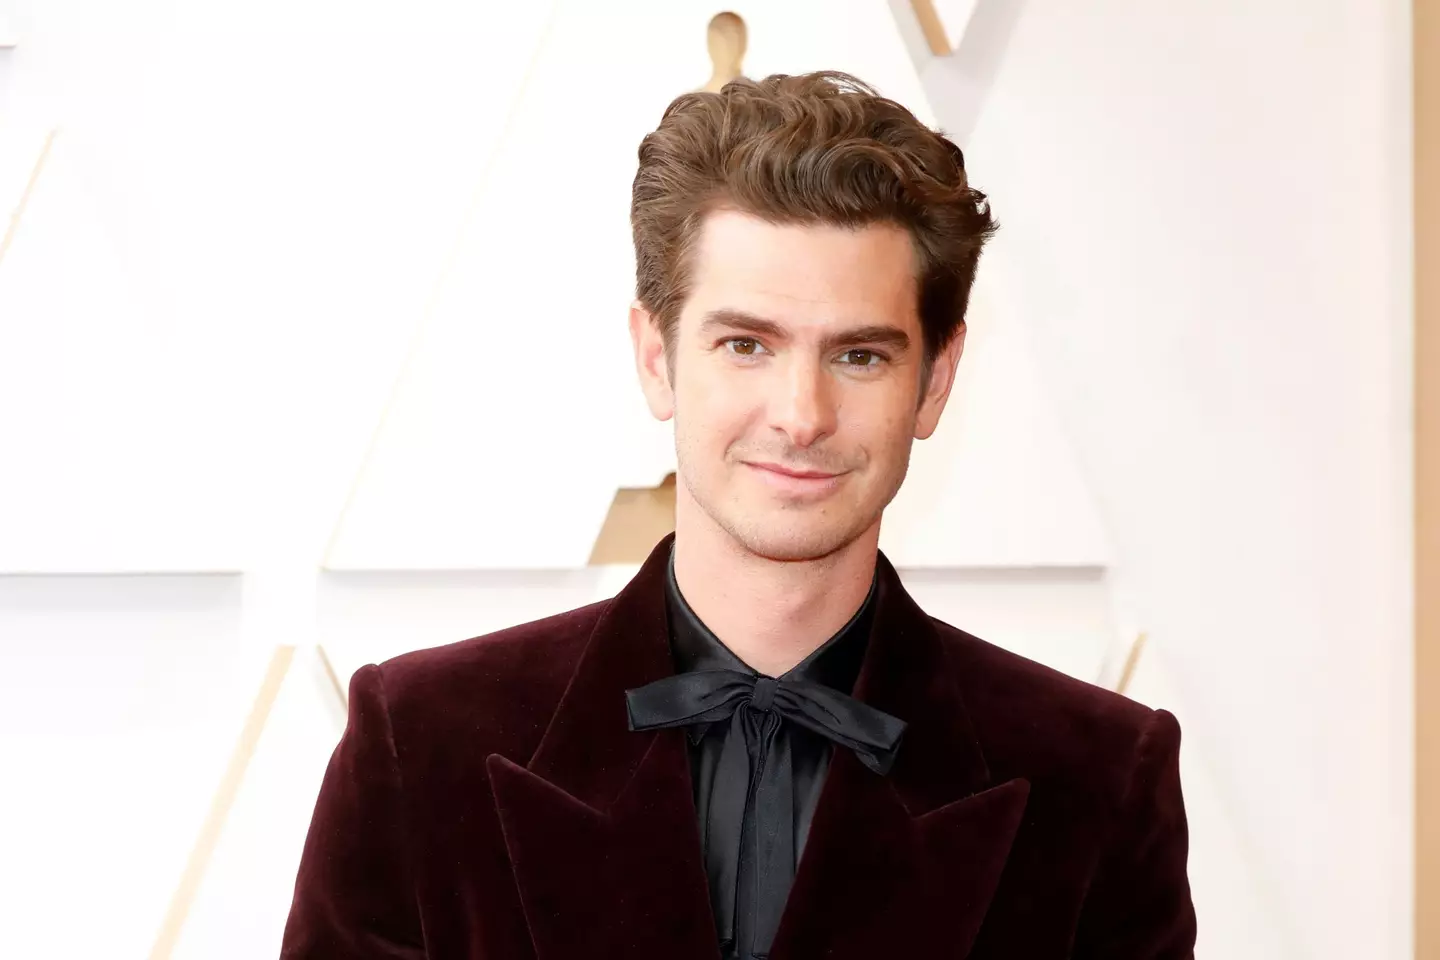 Andrew Garfield was in an attendance at this year's Oscars.